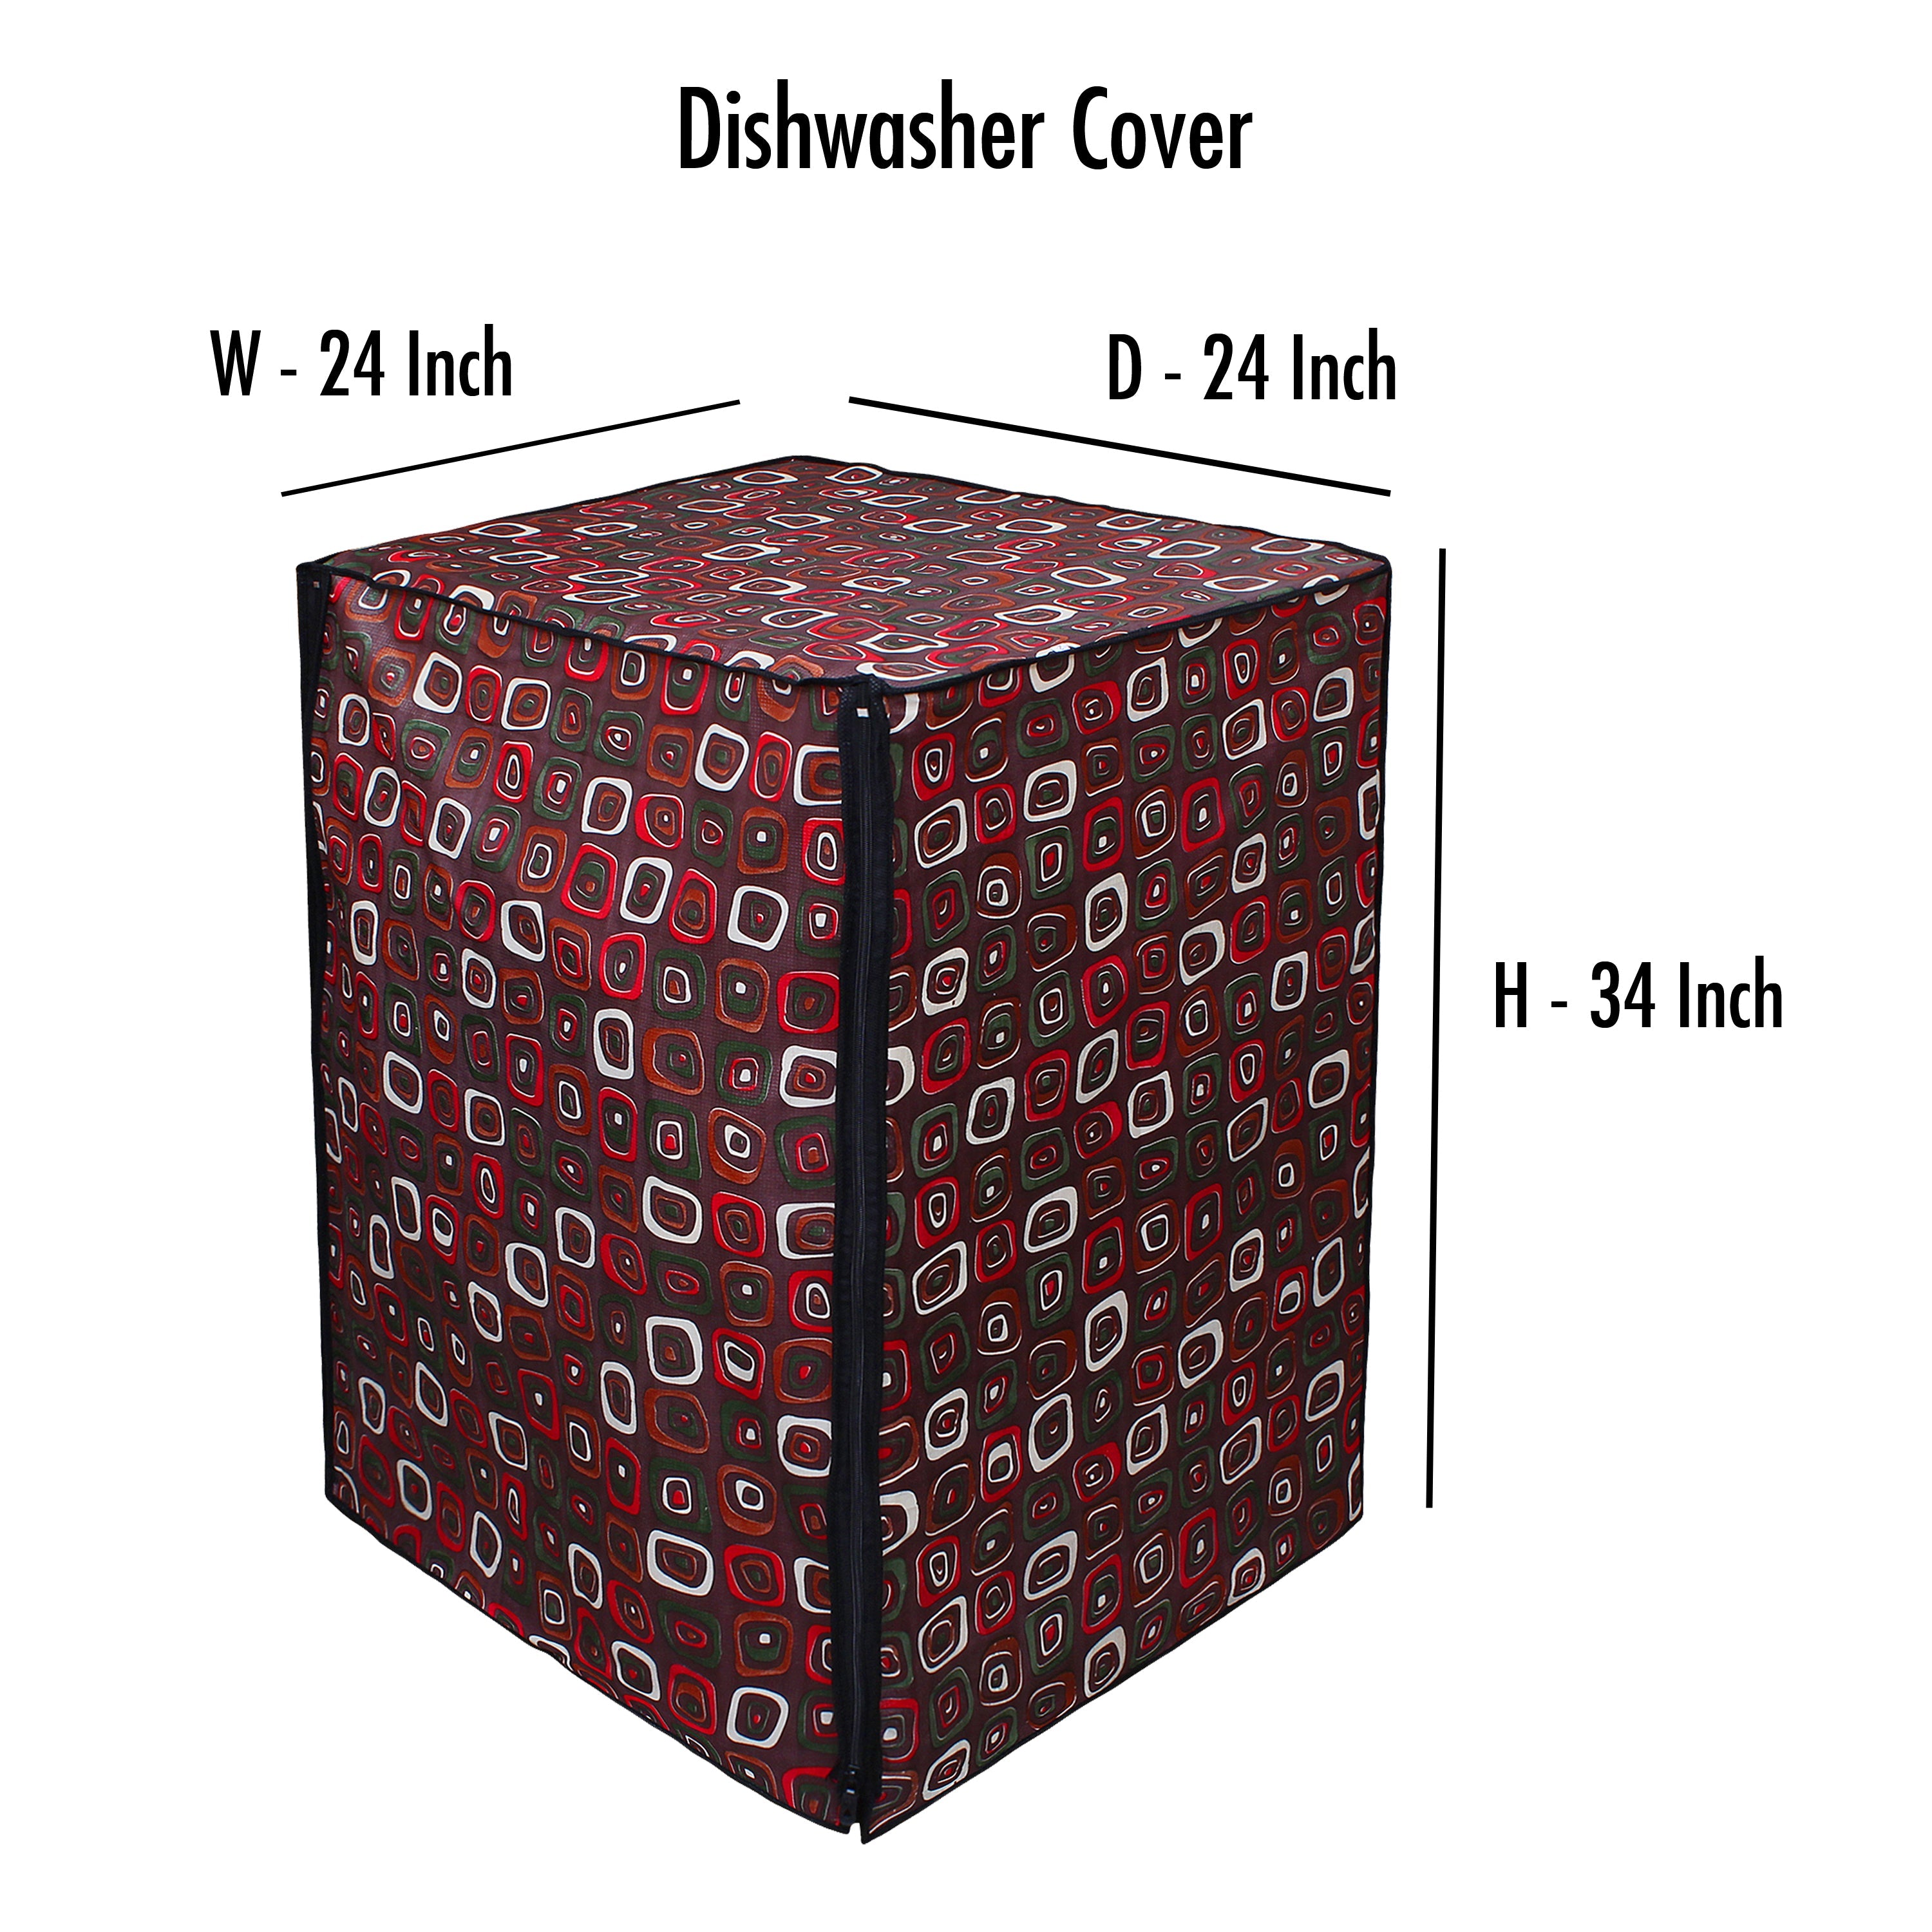 Waterproof and Dustproof Dishwasher Cover, SA65 - Dream Care Furnishings Private Limited